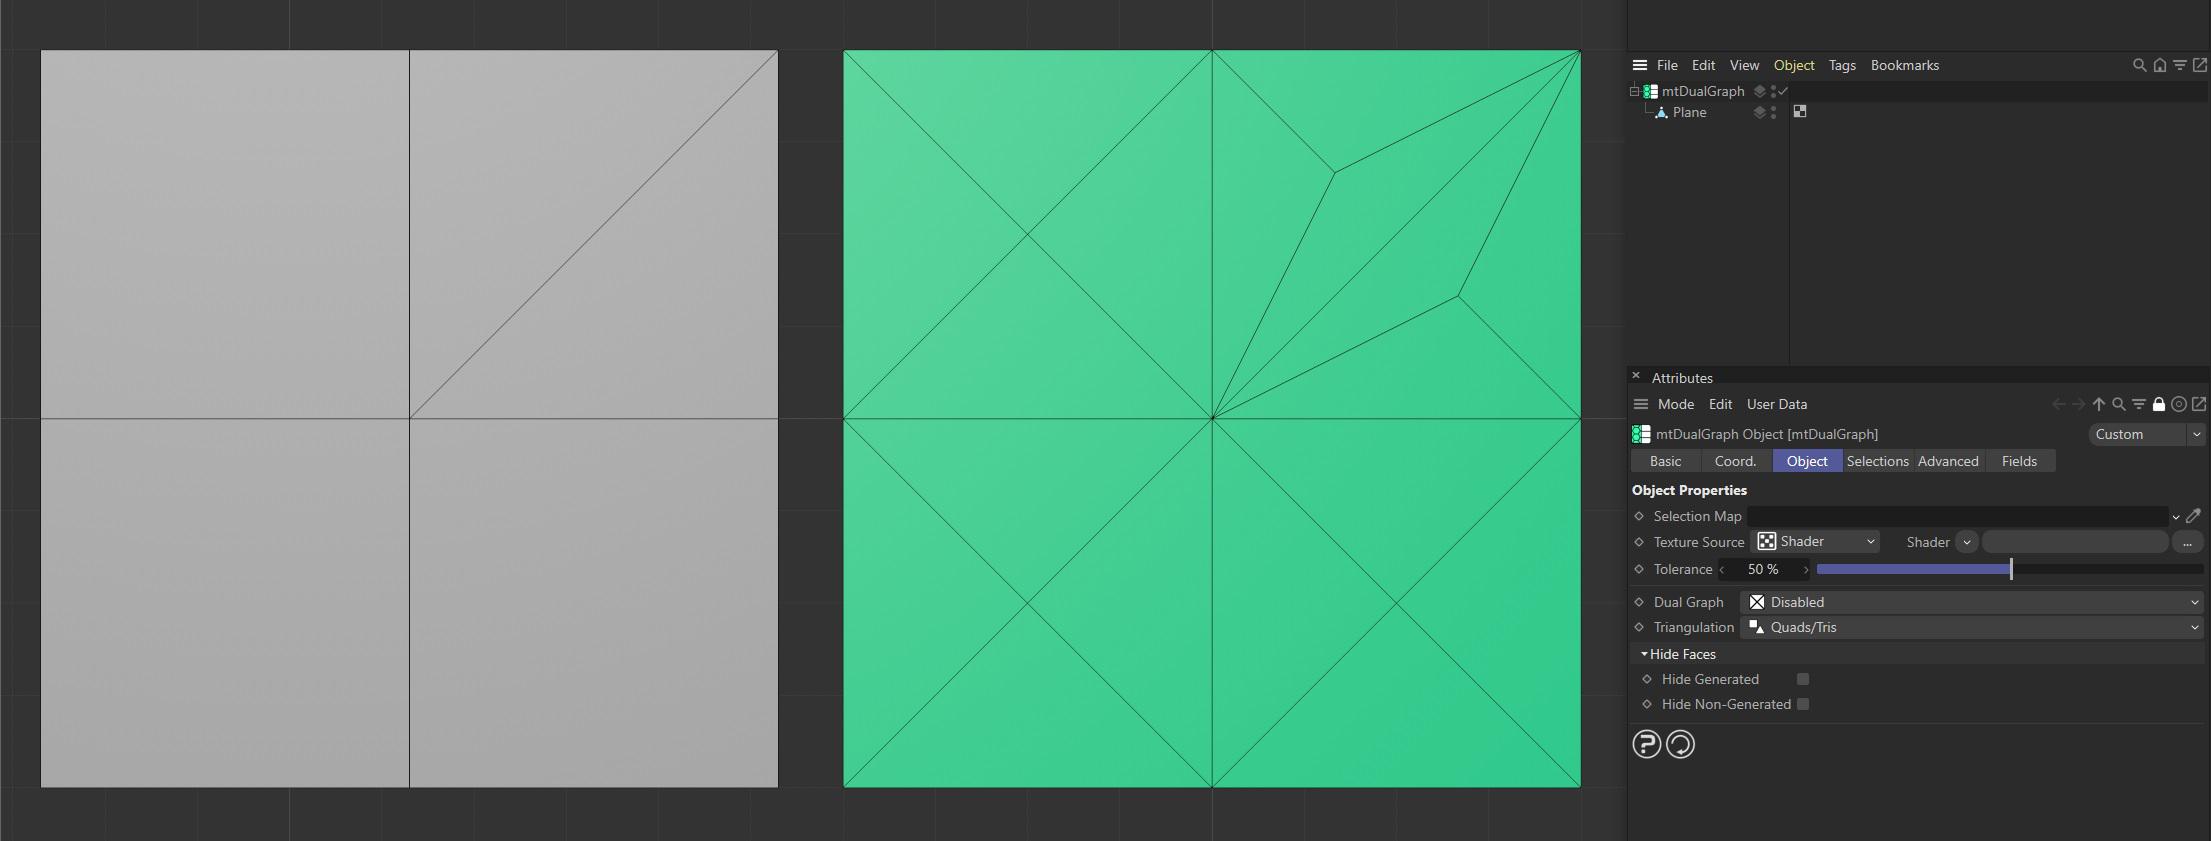 >With Triangulation set to Quads/Tris, mtDualGraph is processing both three and four-sided polygons.